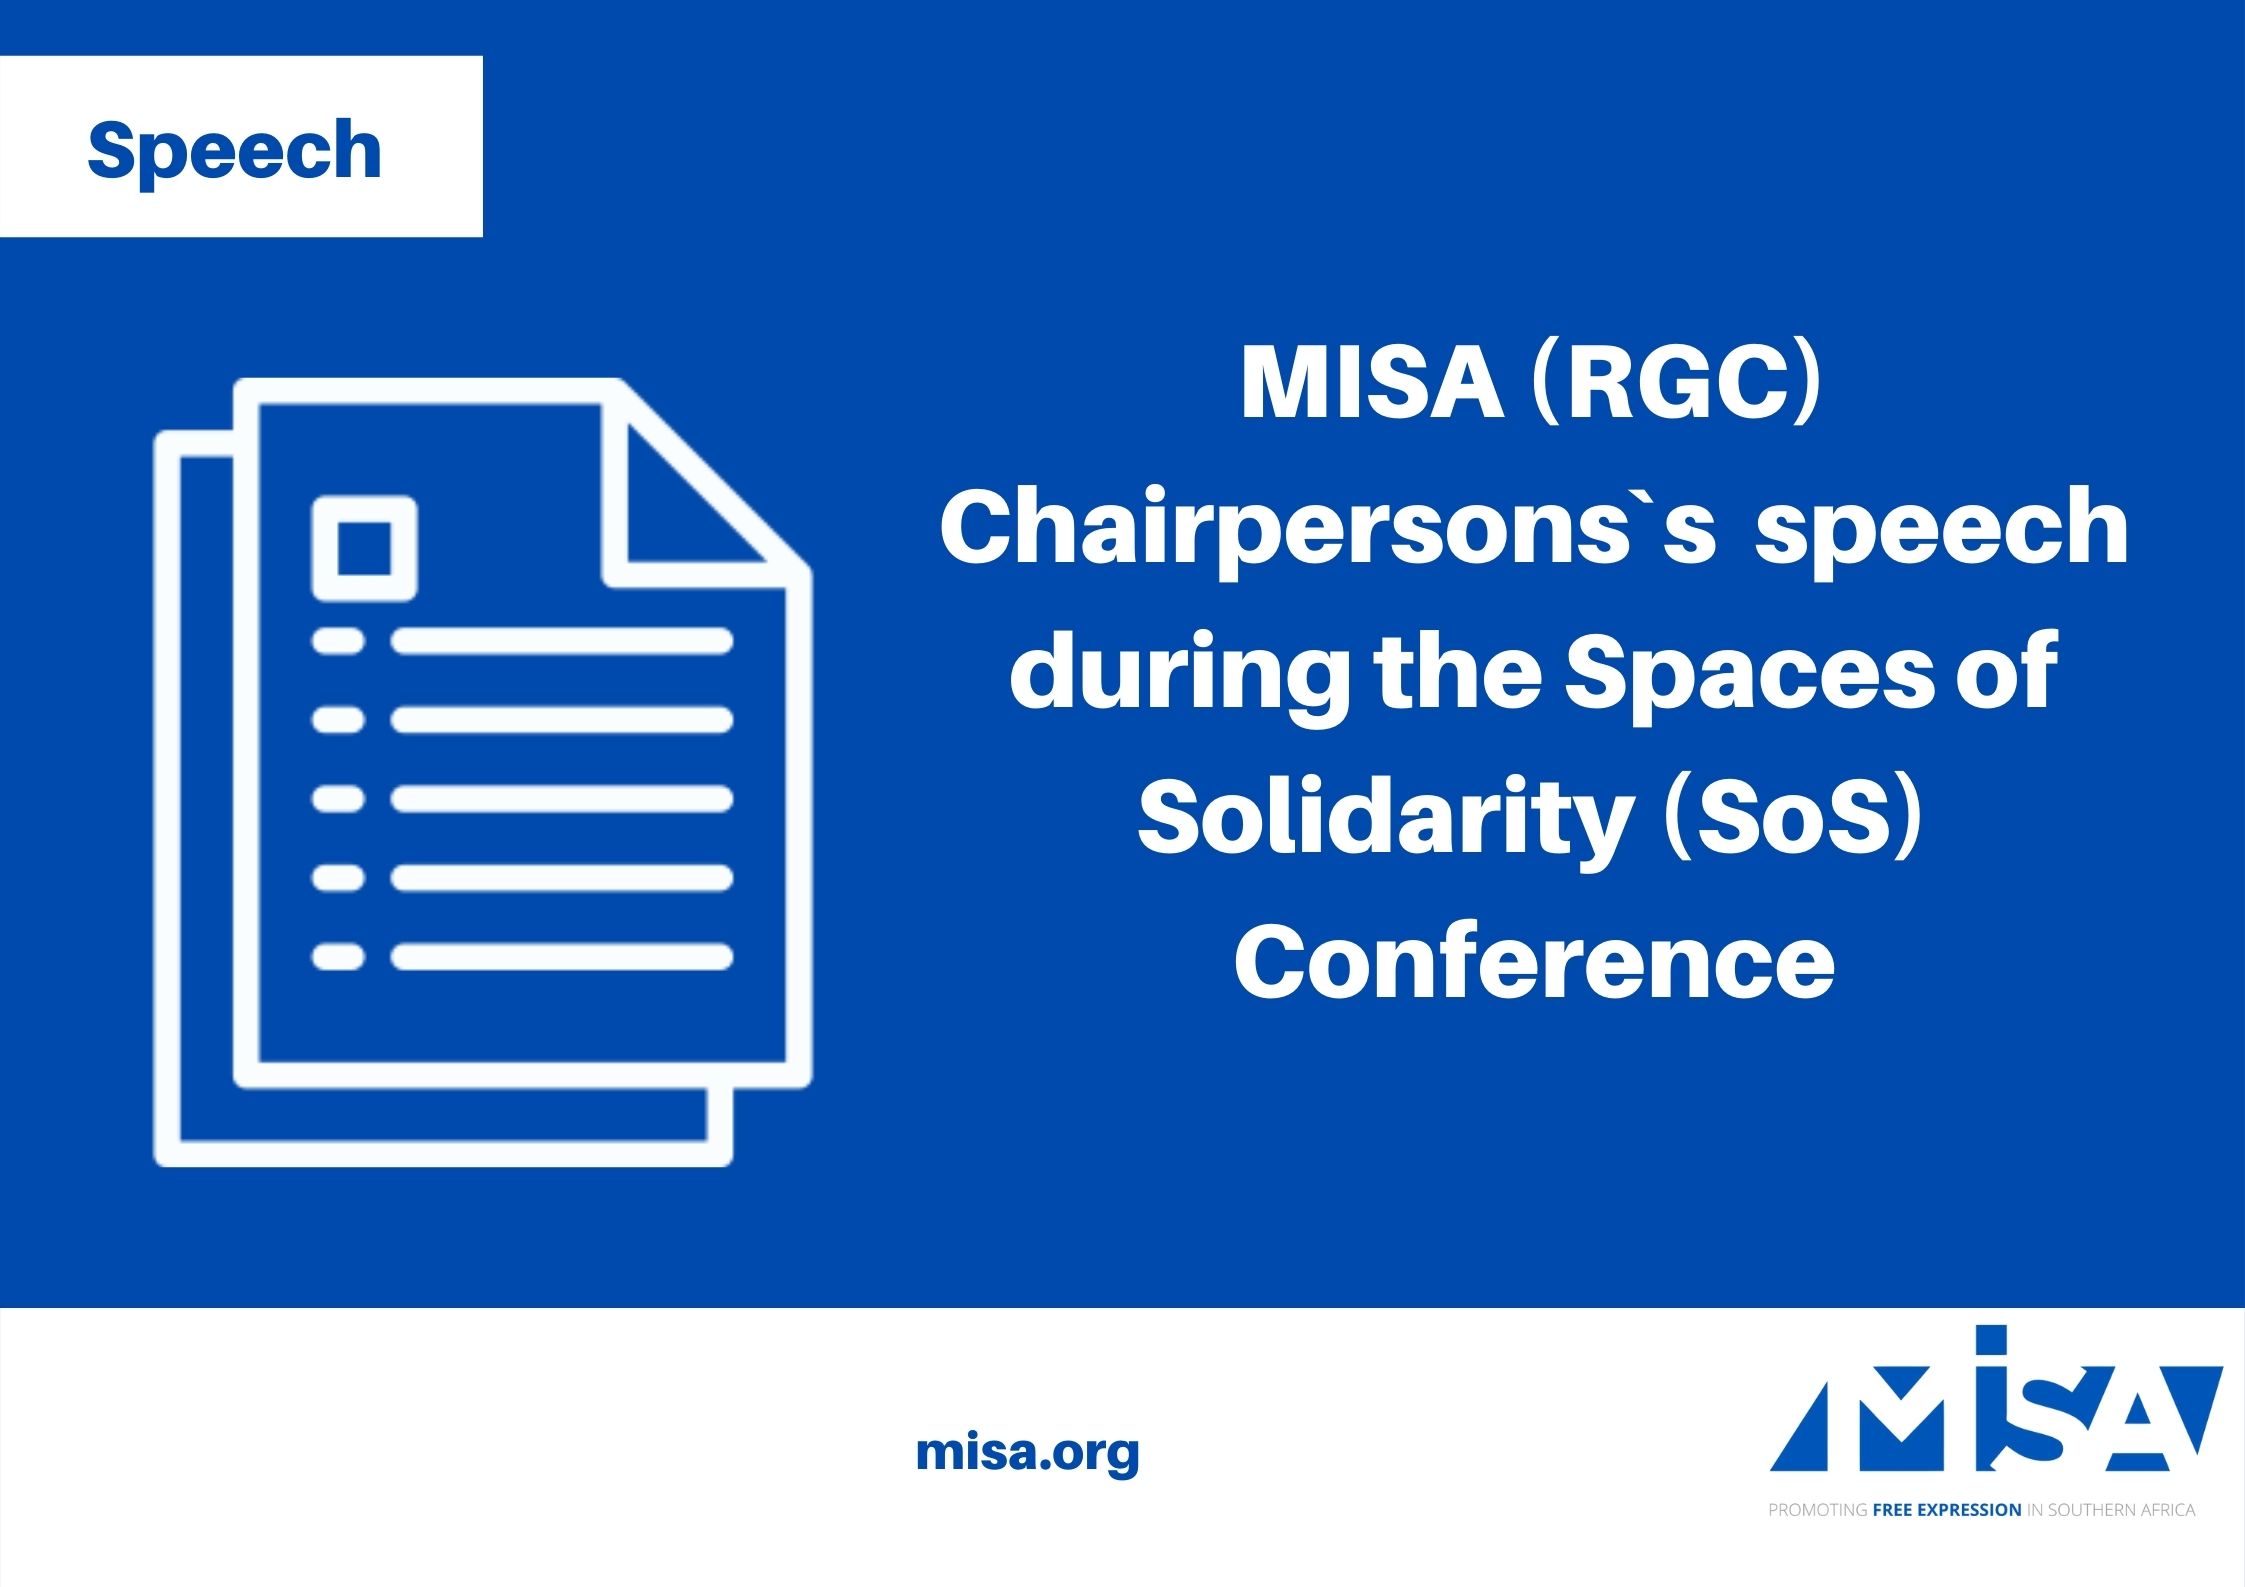 MISA (RGC) Chairpersons`s welcome Remarks during the Spaces of Solidarity (SoS) Conference.